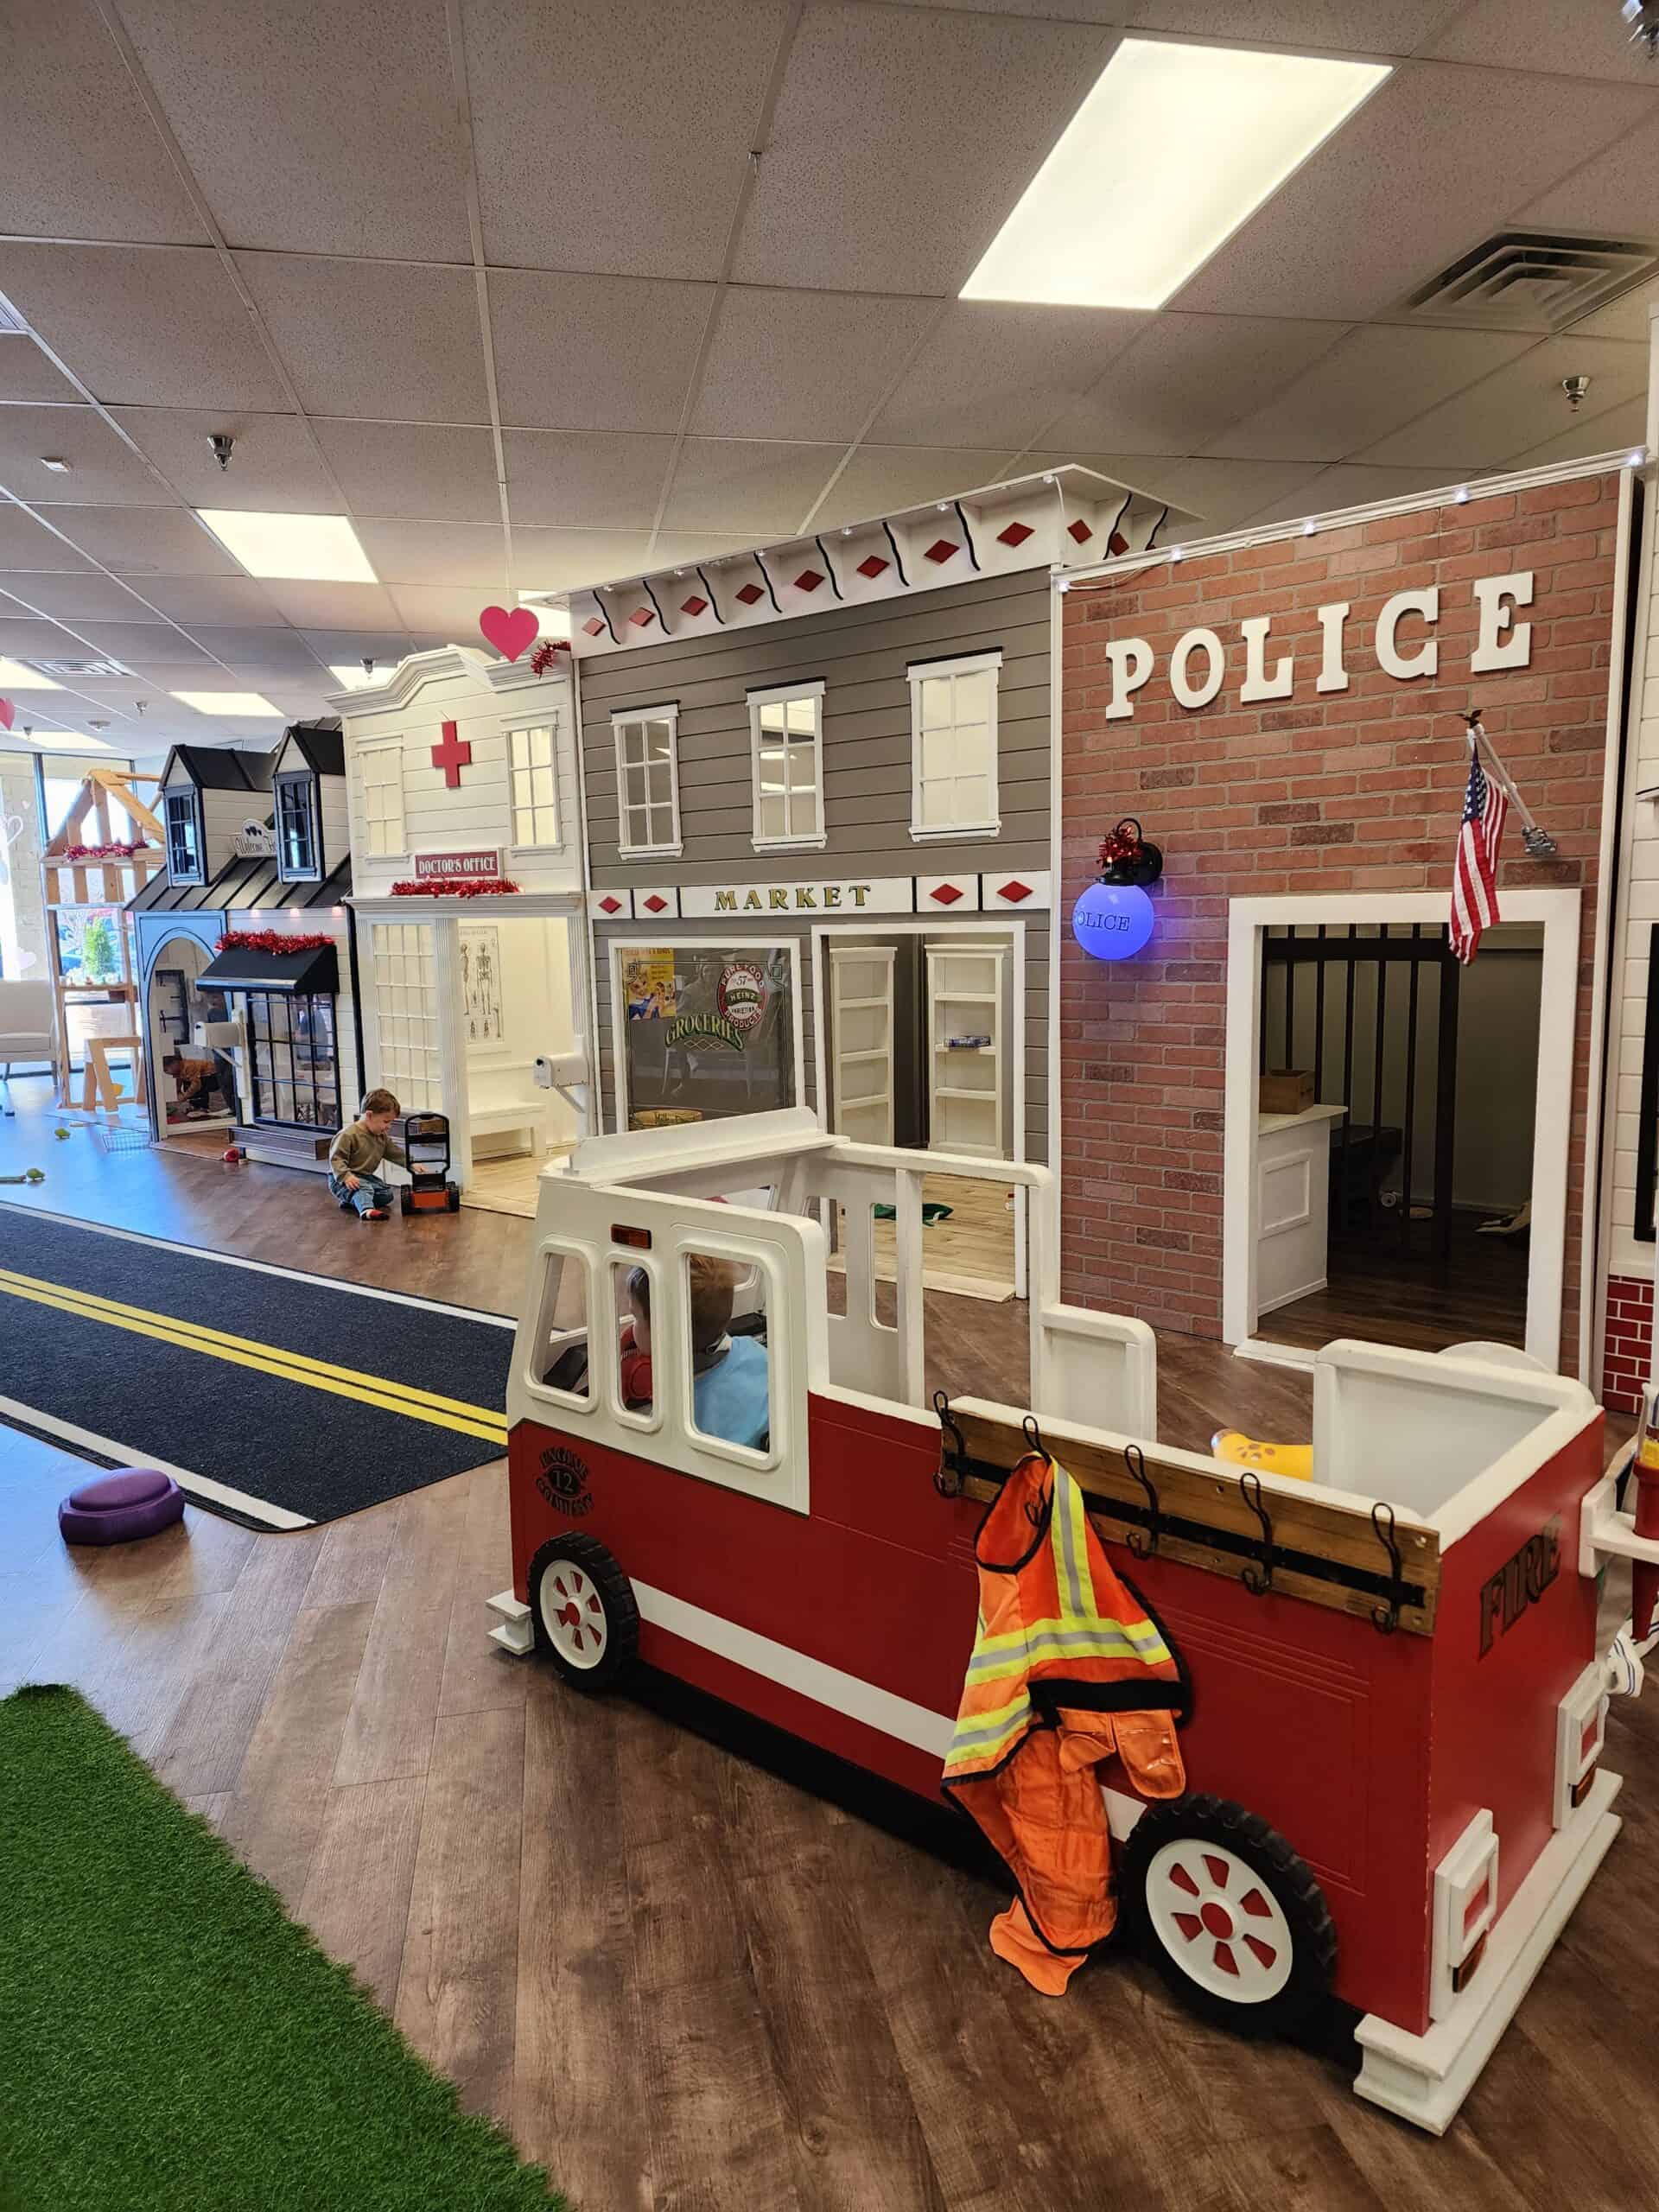 Interior of a children's play place designed to look like a tiny town with a police station, market, and hospital seen